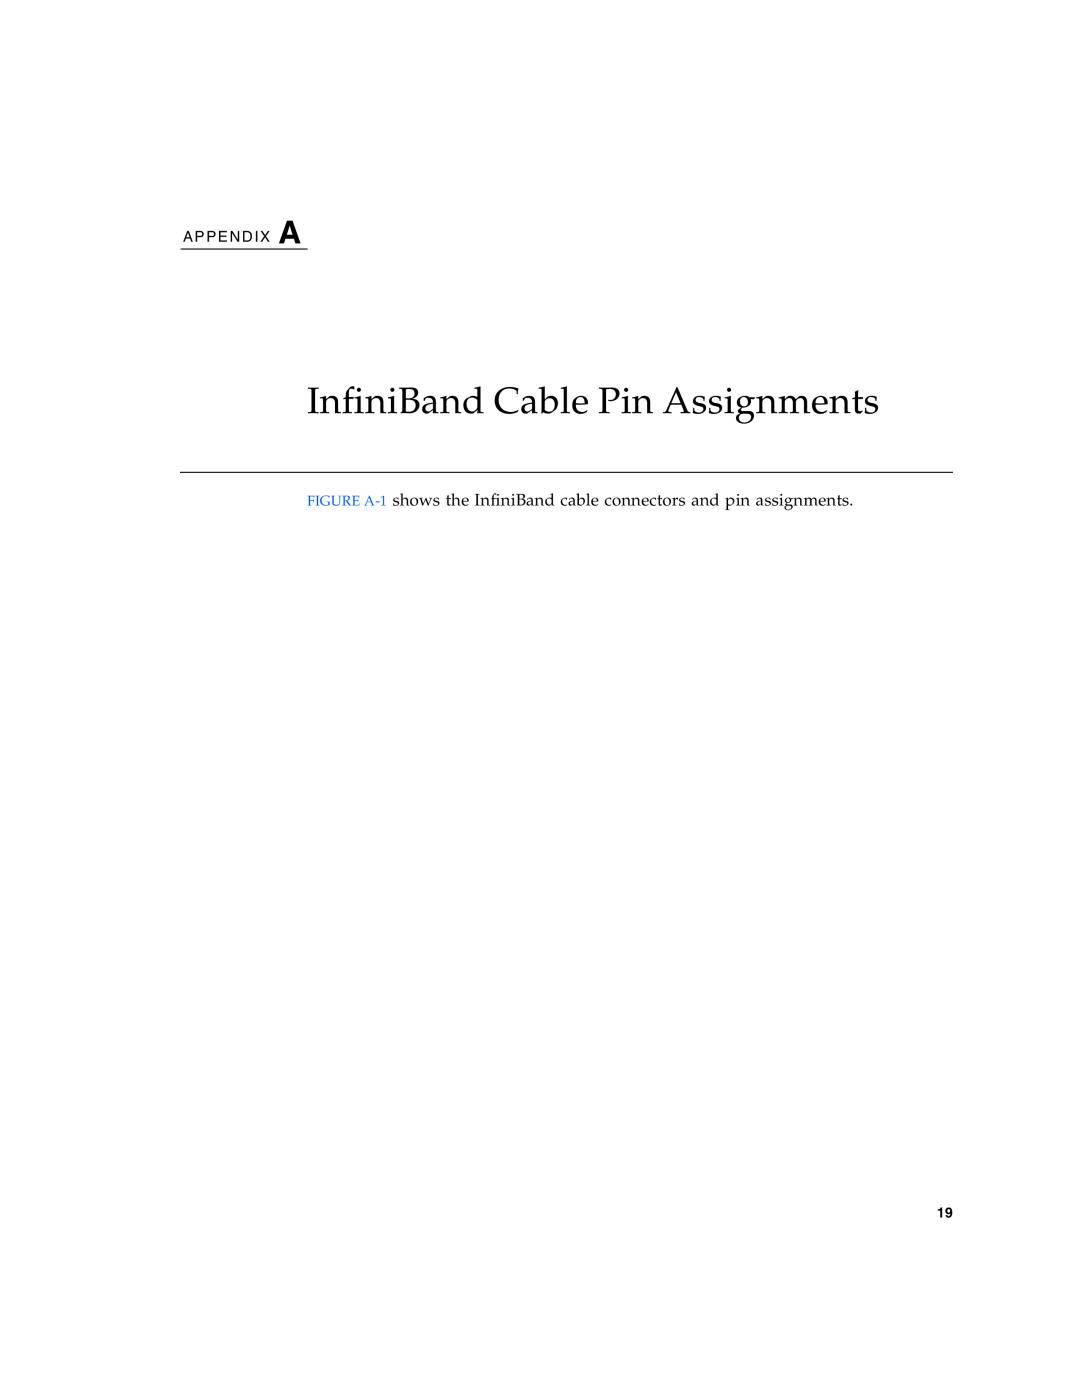 Sun Microsystems PCI manual InfiniBand Cable Pin Assignments, A P P E N D I X A 